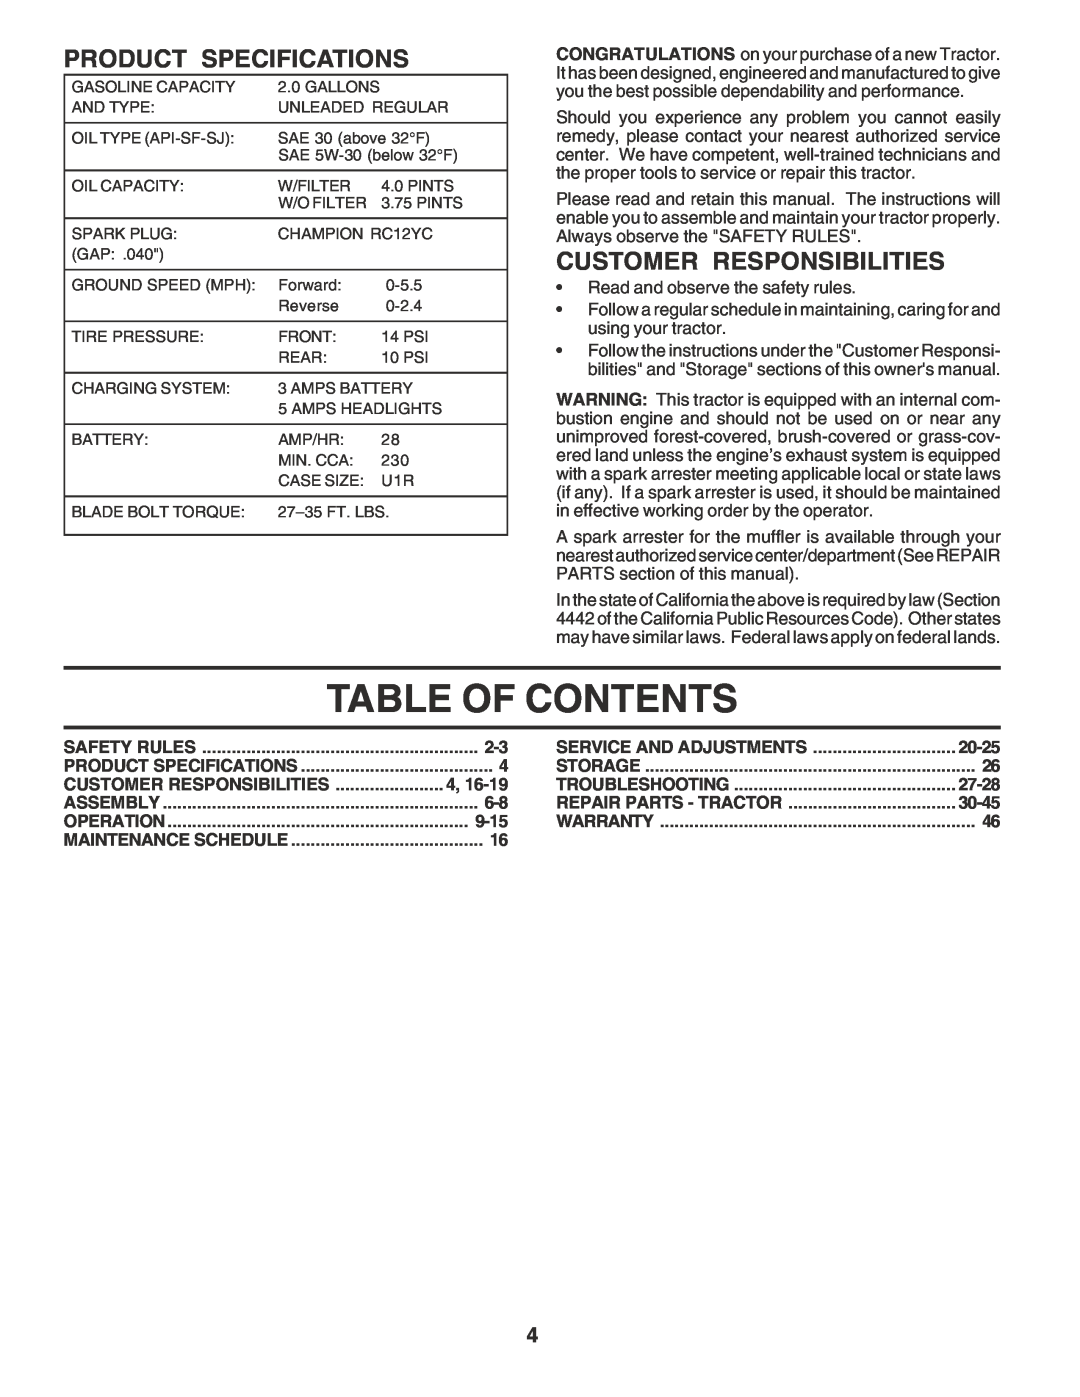 Poulan PPR20H42STC owner manual Table Of Contents, Product Specifications, Customer Responsibilities 